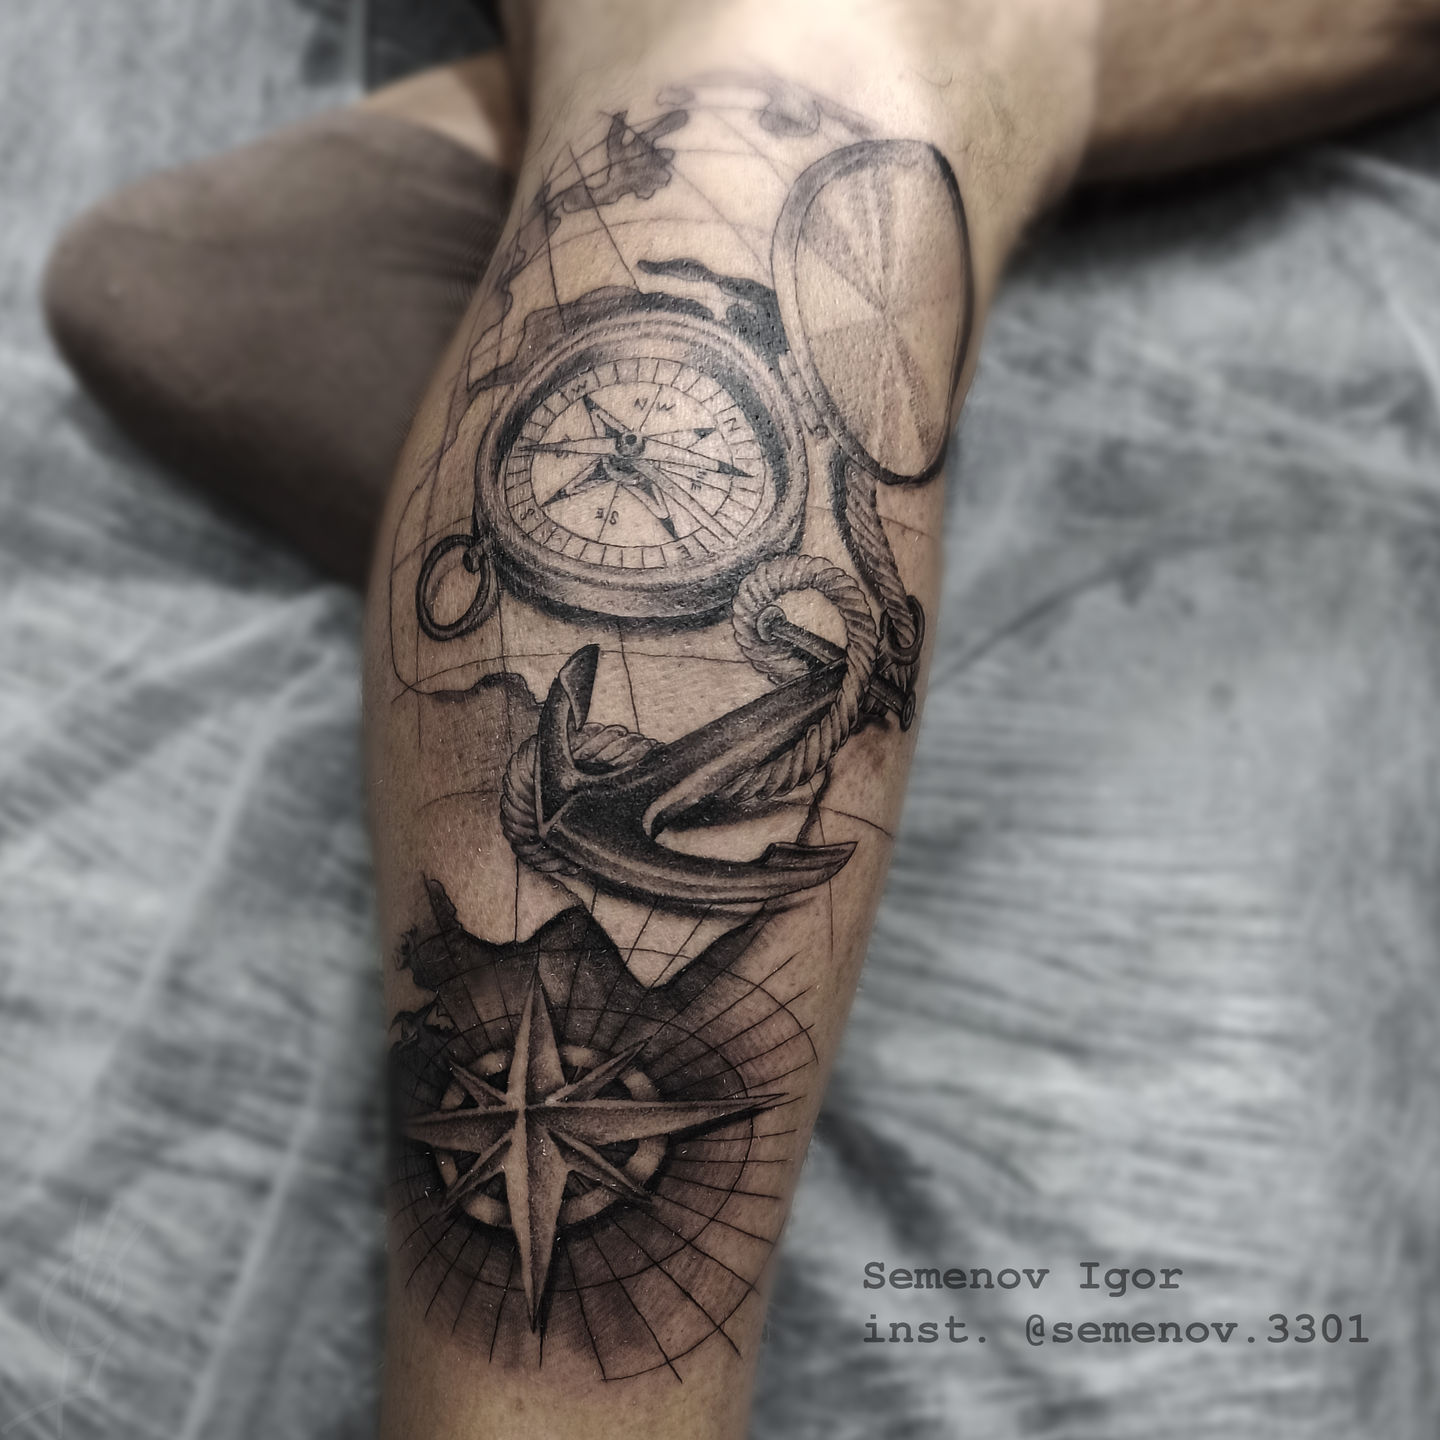 Gentleman Neo-Traditional Black and Grey Realistic Tattoo | Flickr